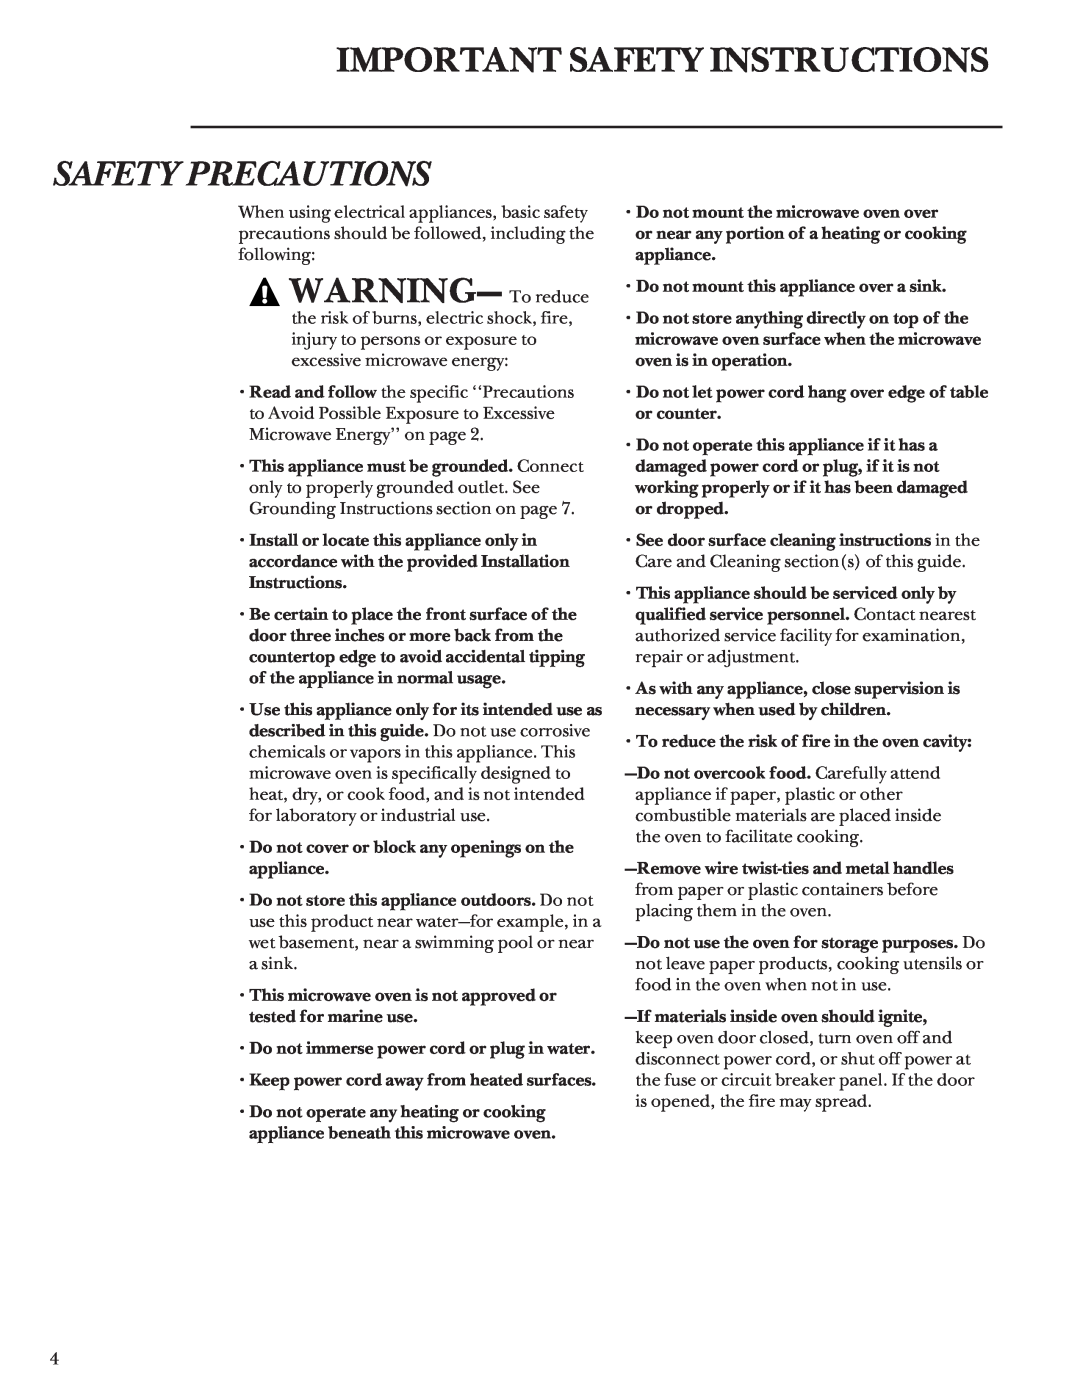 GE ZEM200 manual Important Safety Instructions, Safety Precautions, WARNING- To reduce 